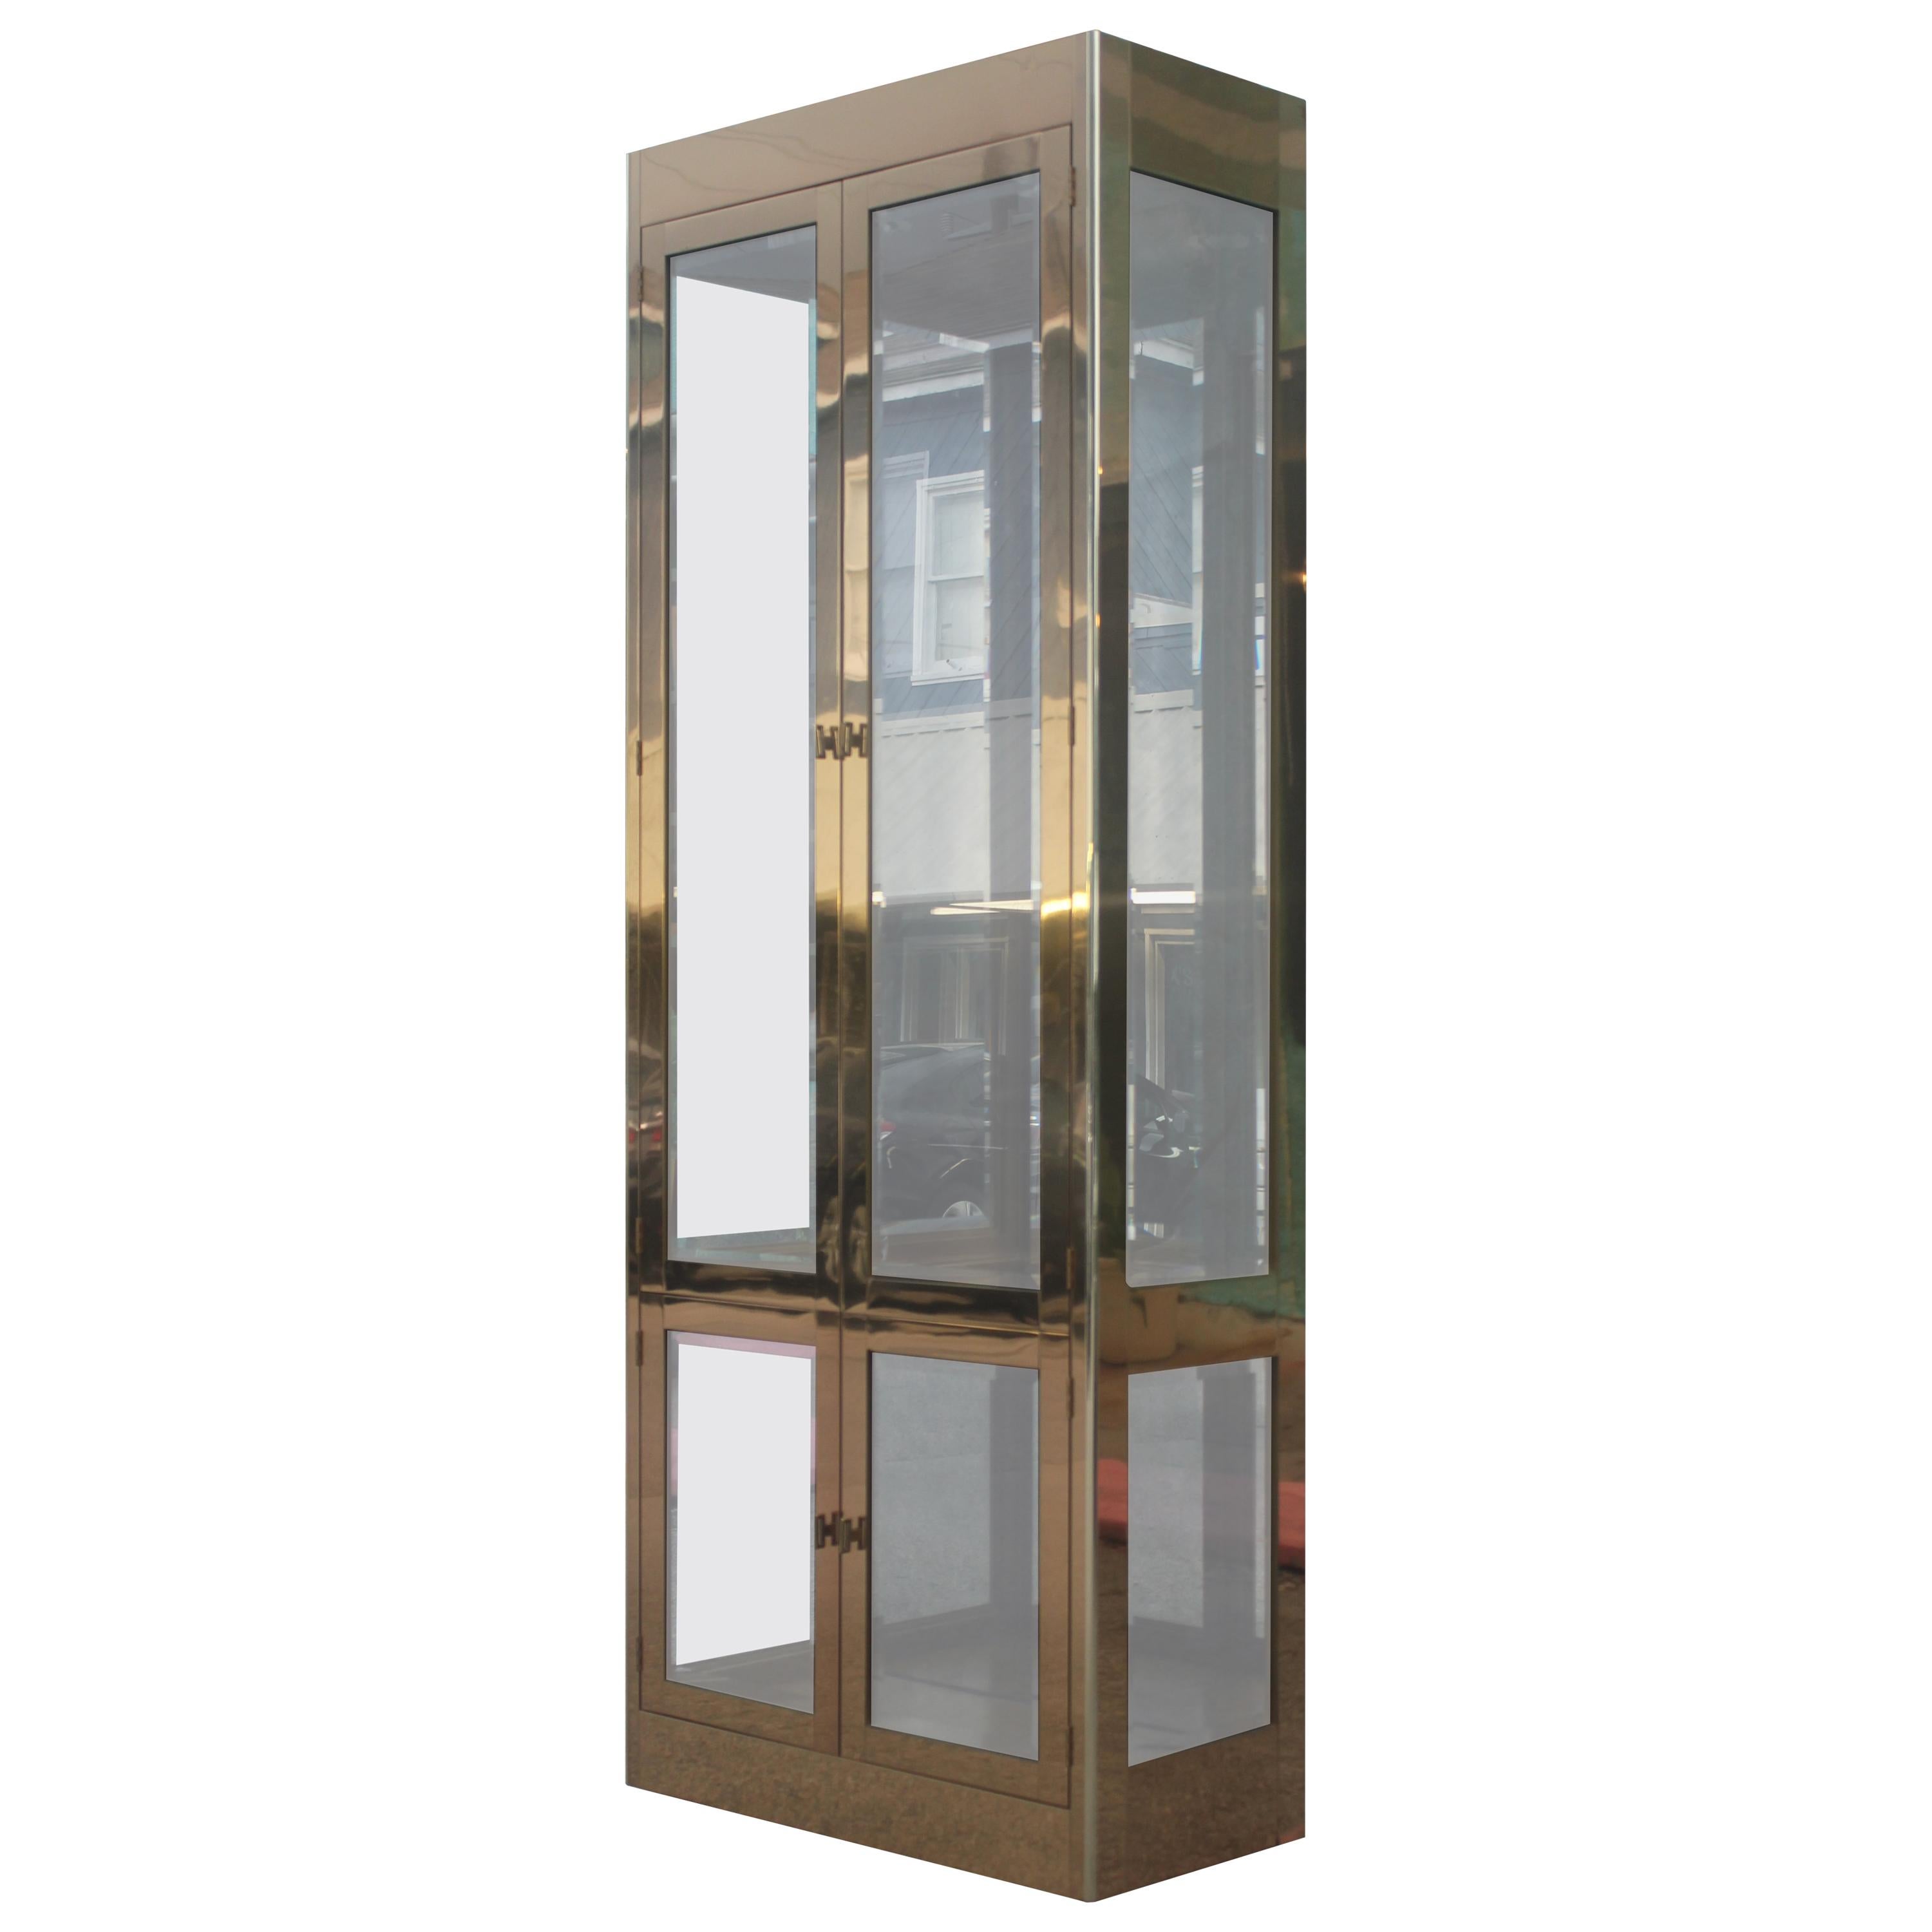 Pair of gorgeous Hollywood Regency brass and glass vitrines / bookcases by Mastercraft. Both feature two cabinet spaces (large on top, small on bottom) with adjustable glass shelves.